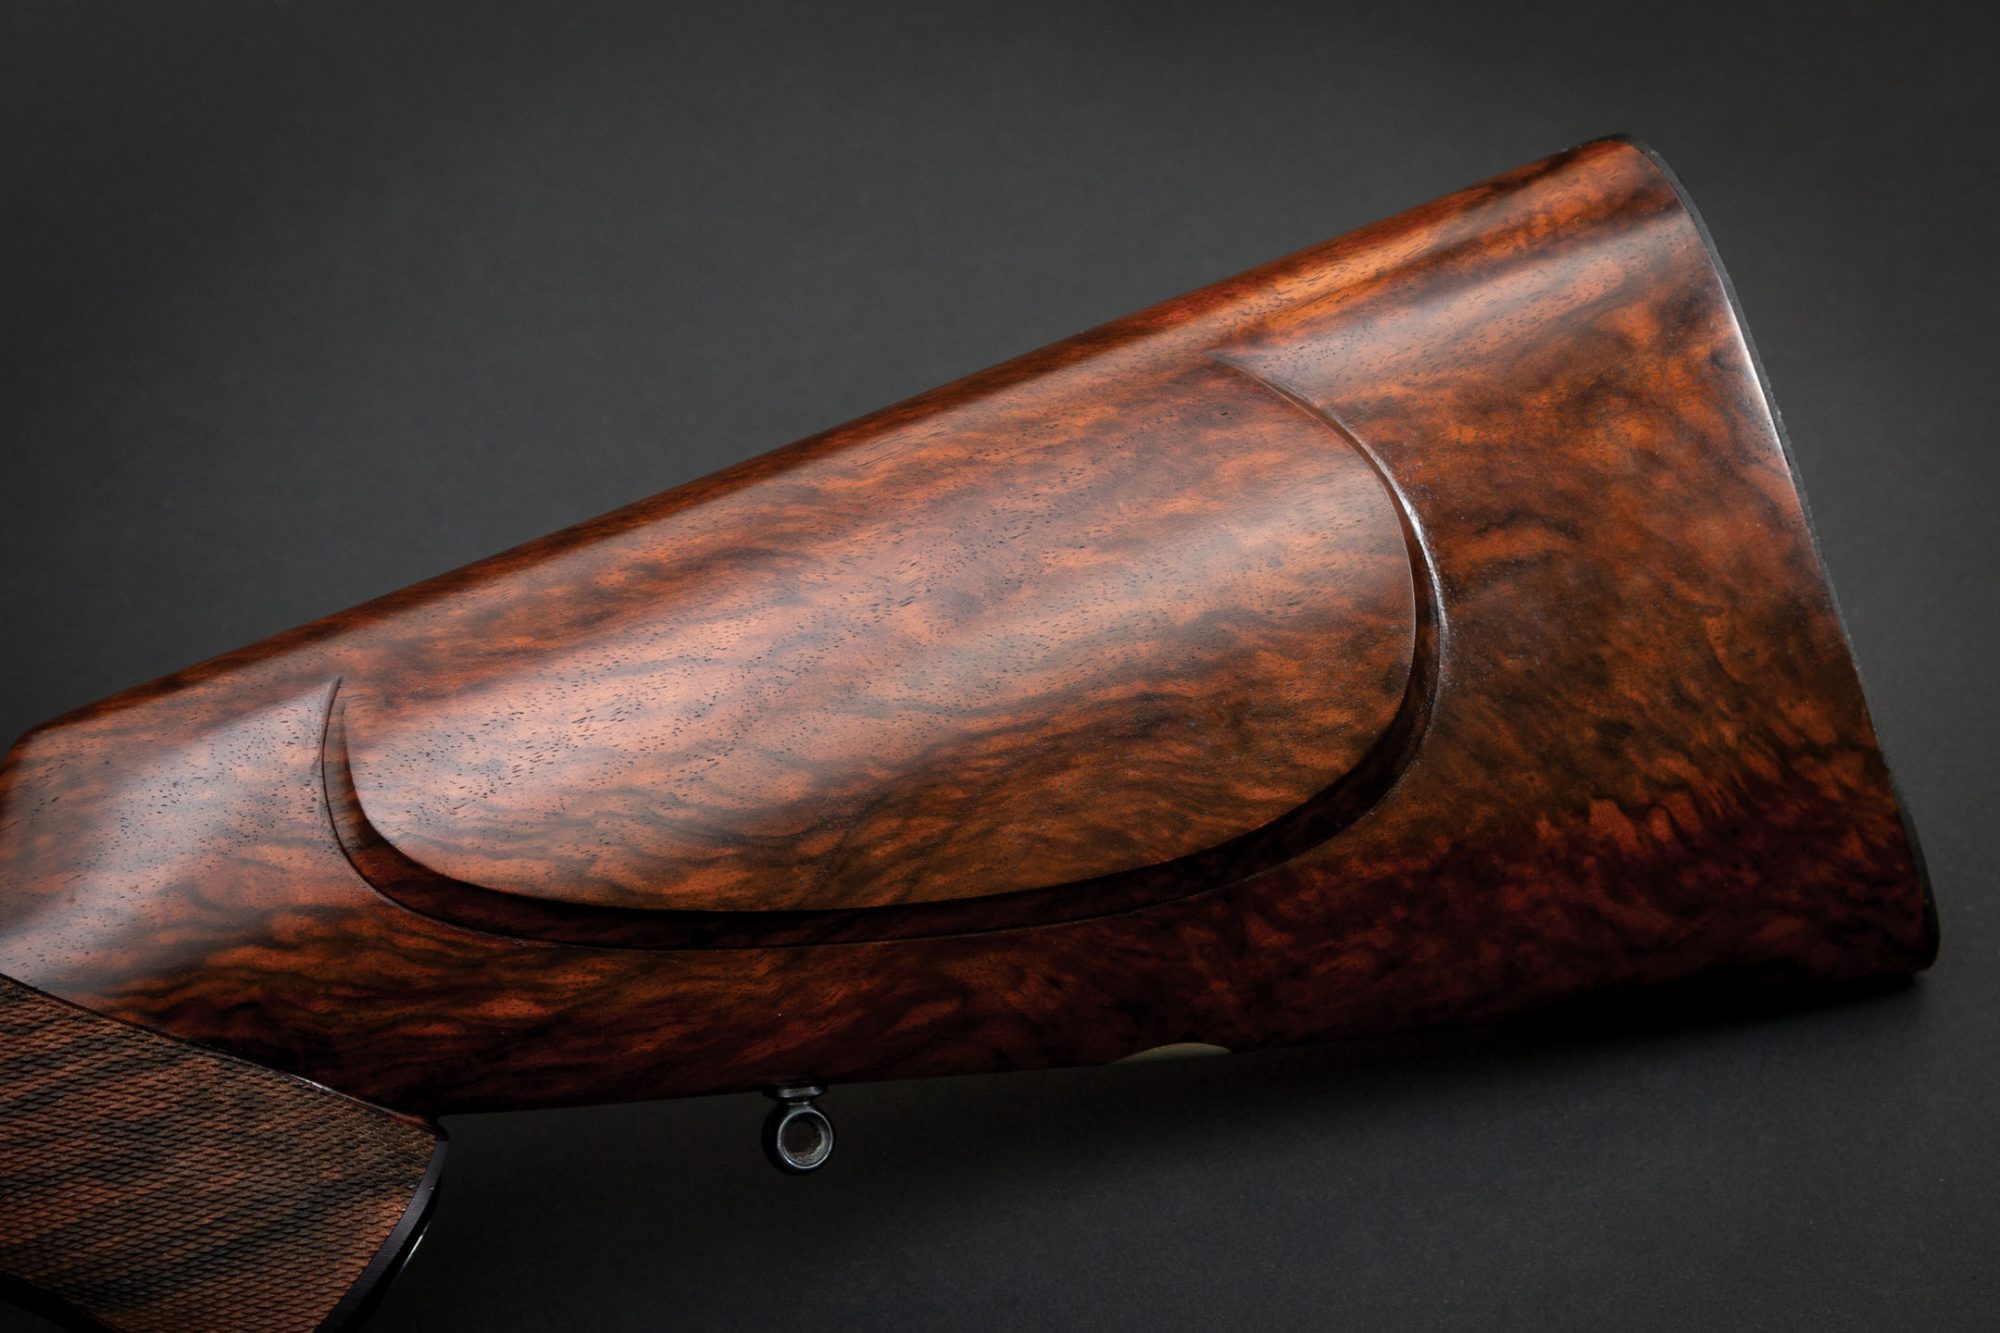 A. Hollis & Son double rifle, restored by Turnbull Restoration Co. of Bloomfield, NY